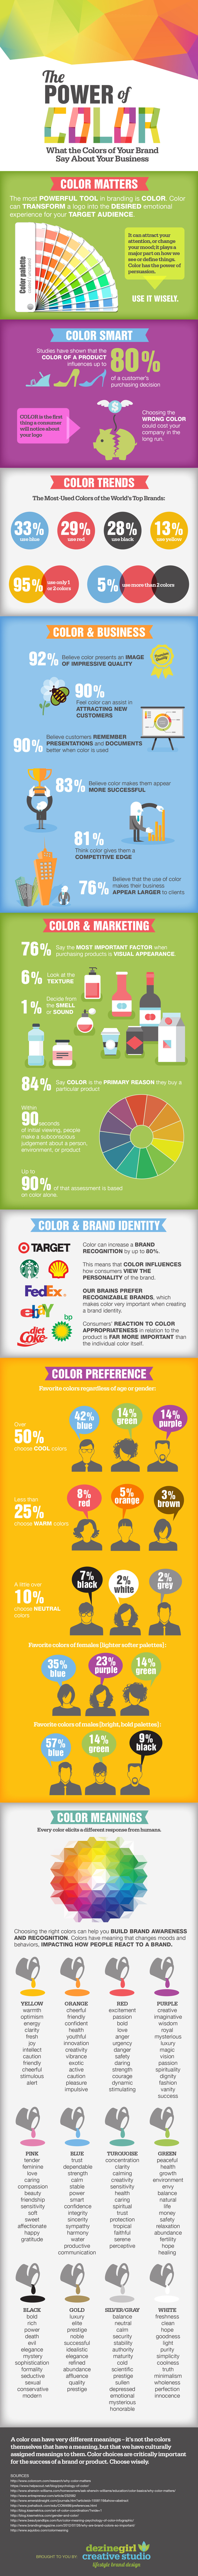 The Power of Color #infographic